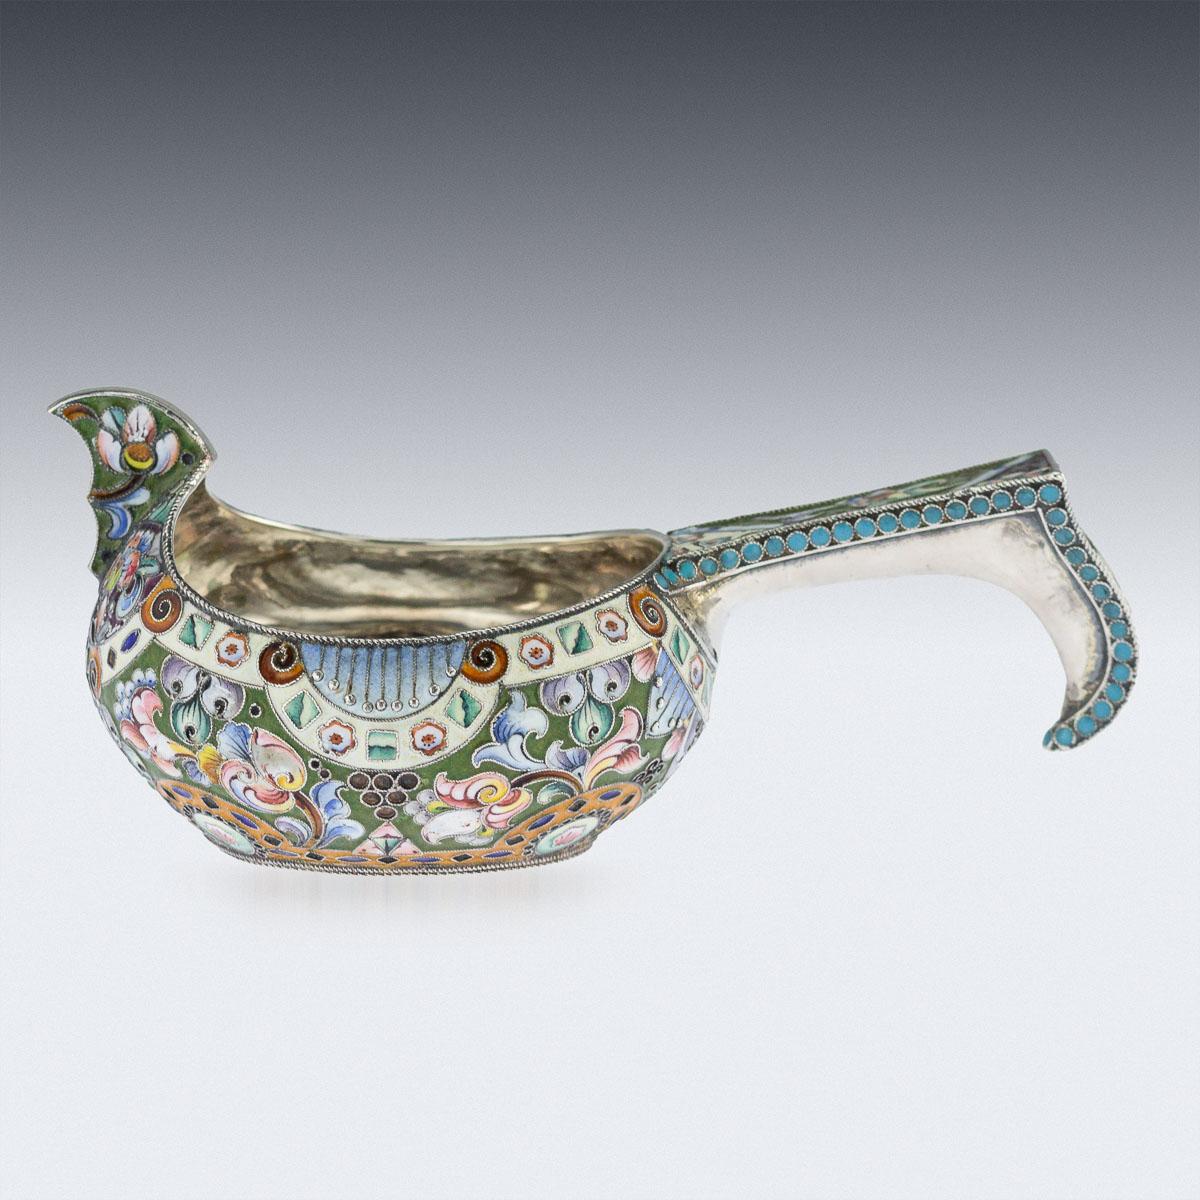 Antique early 20th century Imperial Russian solid silver and shaded cloisonné' enamel Kovsh, of traditional oval form, with raised prow and hook handle, the body beautifully decorated with various shaded polychrome cloisonné' enamel with stylised